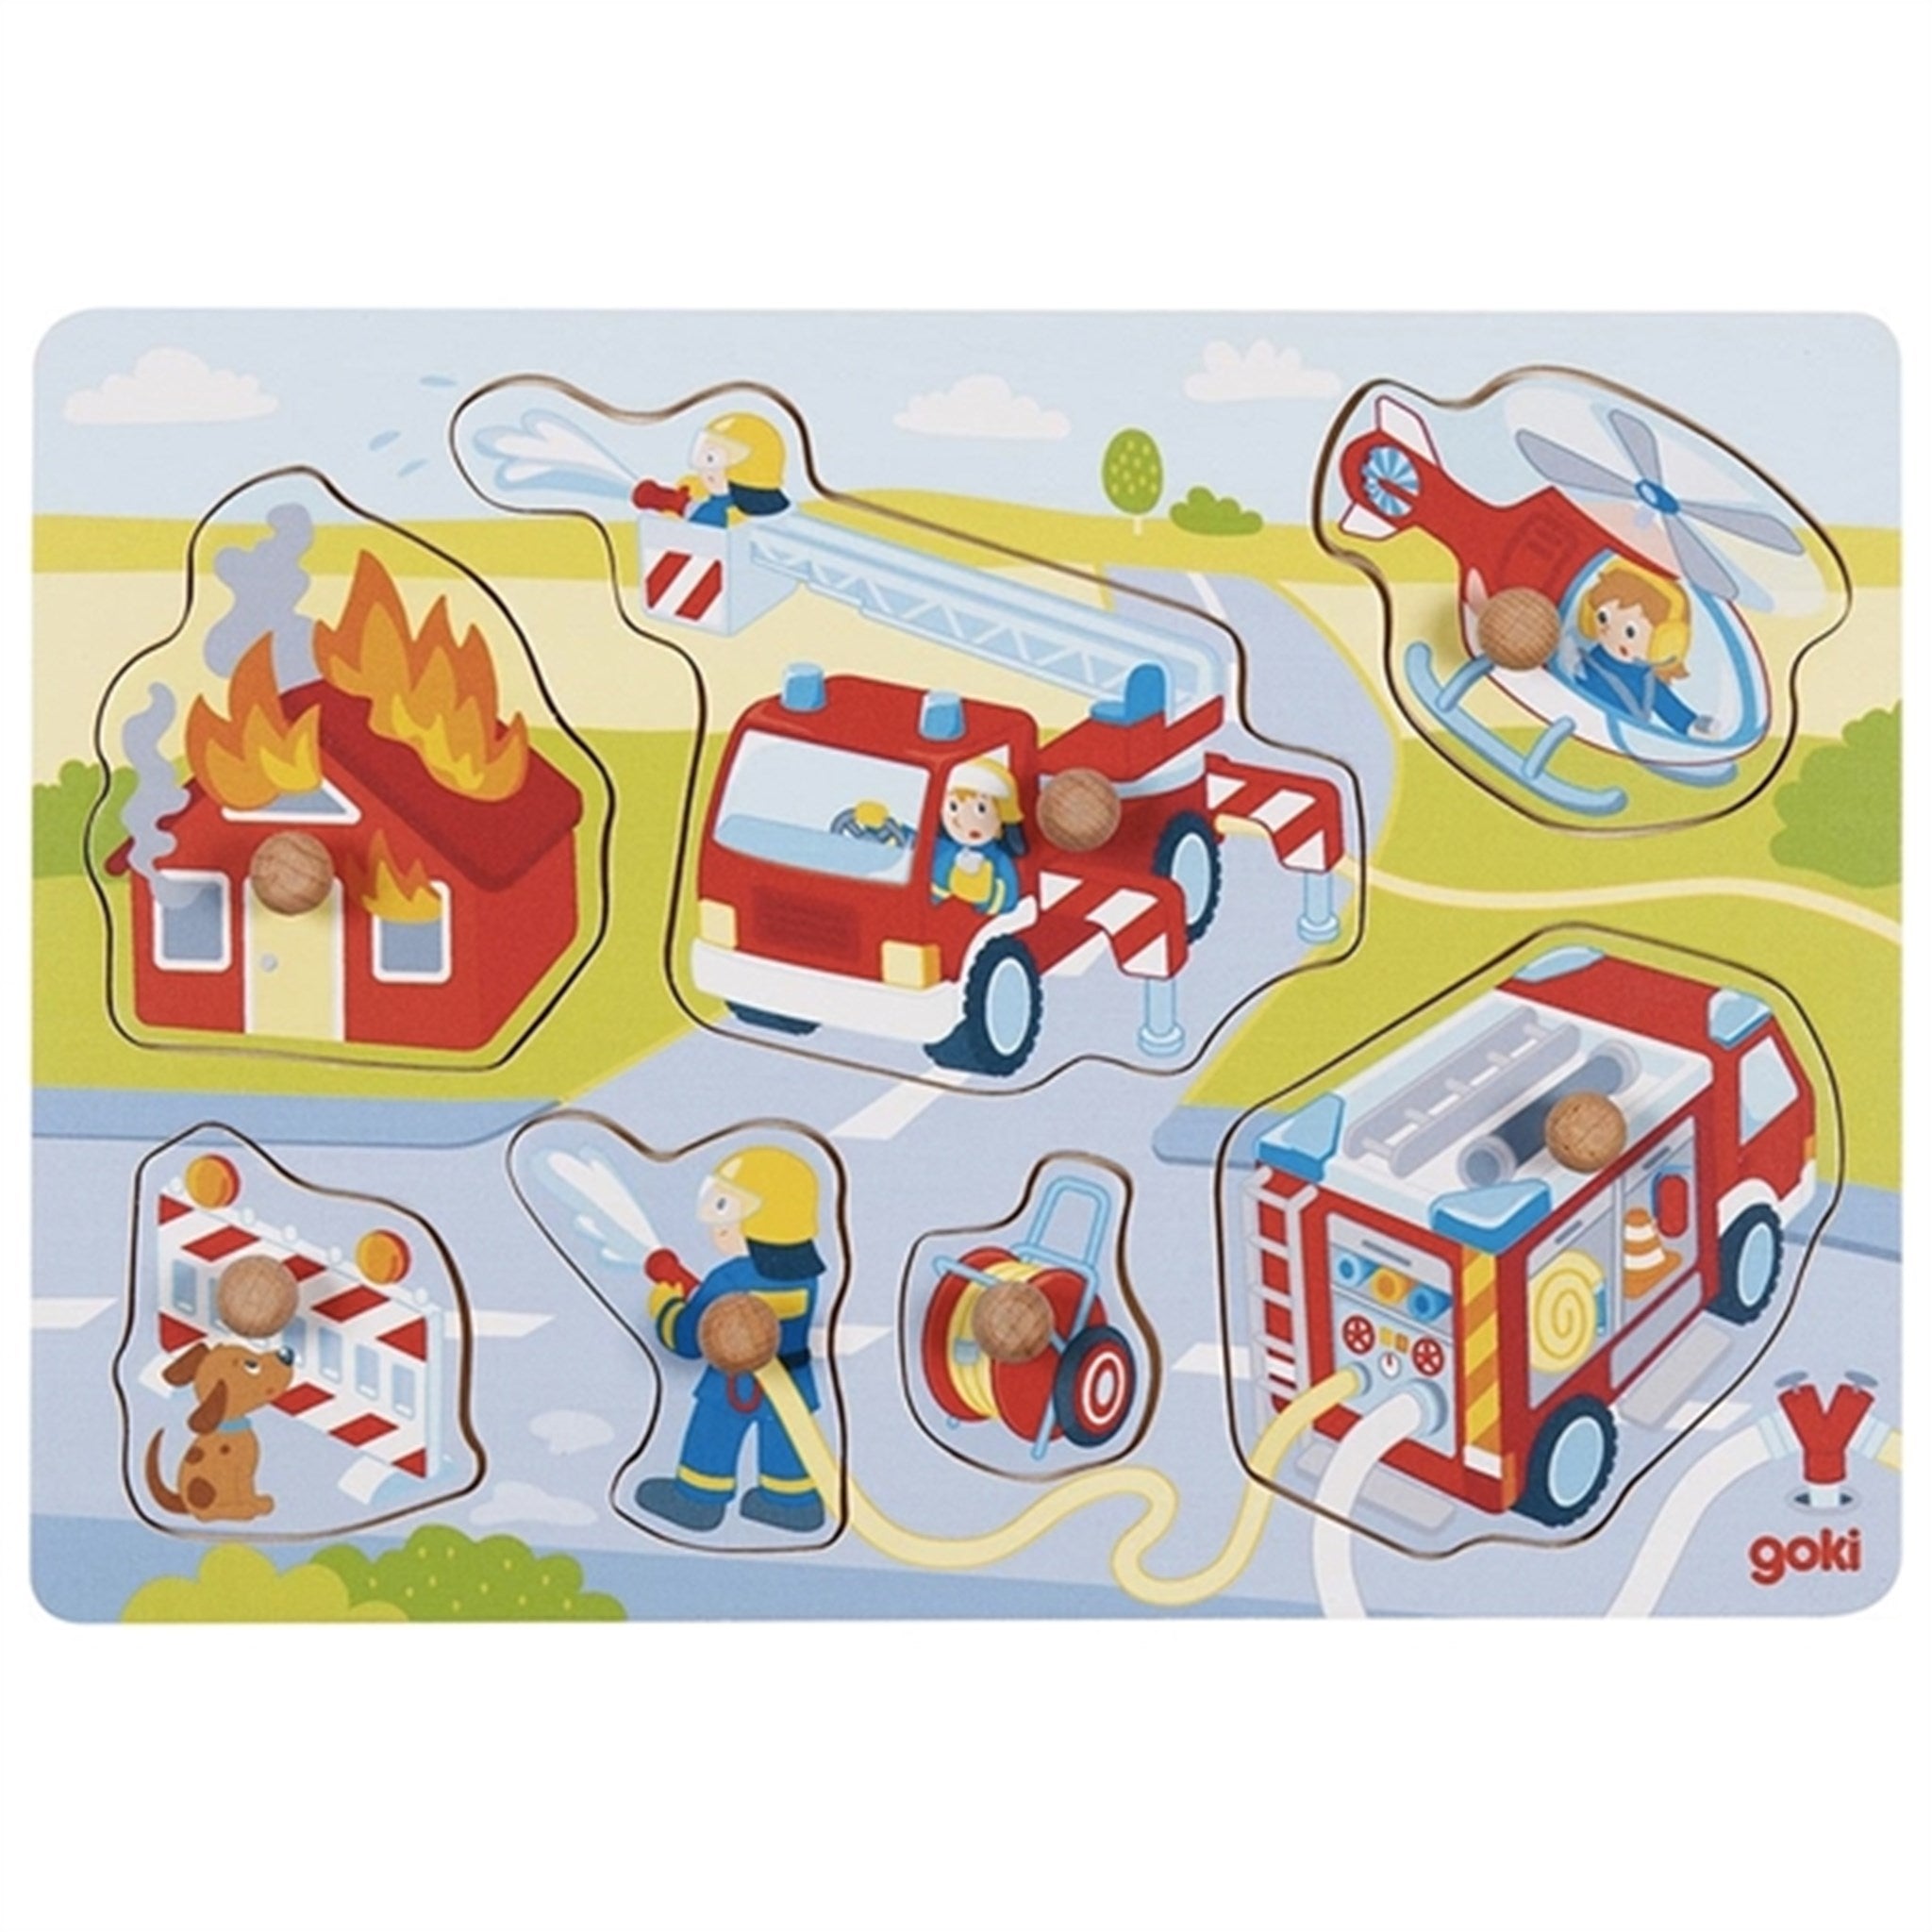 Goki Puzzle - Firefighters In Action